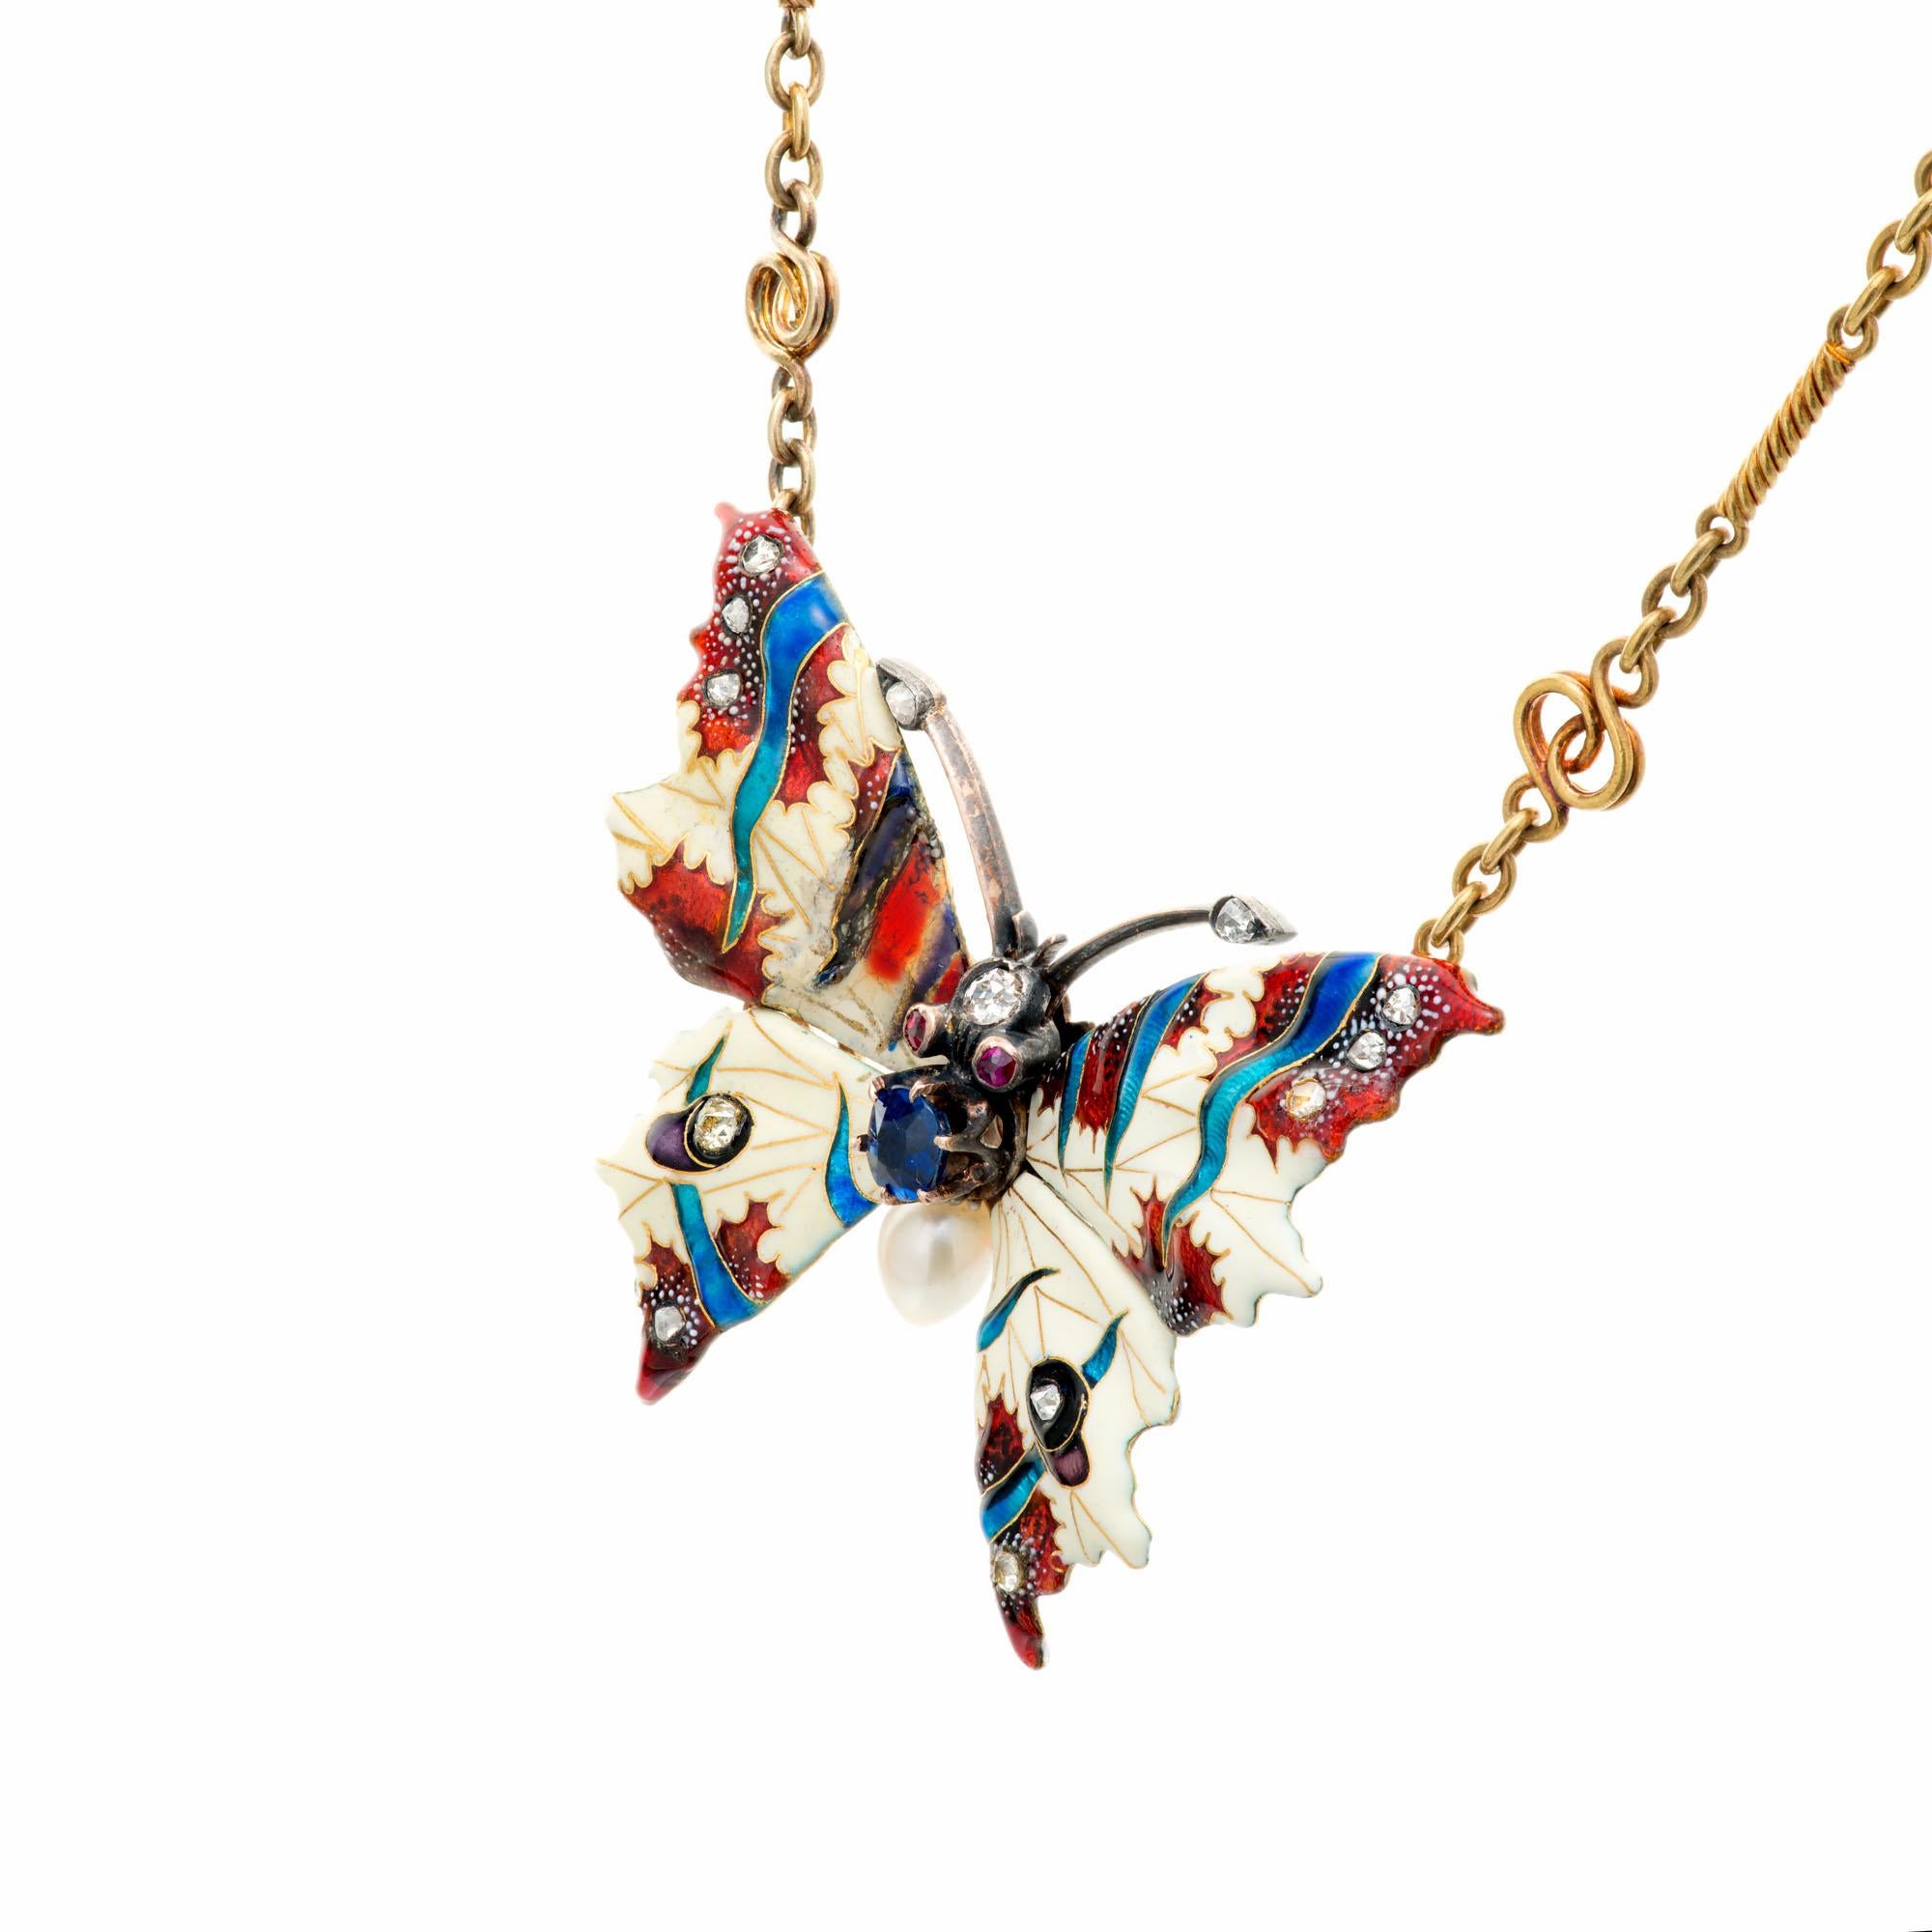 Diamond, pearl and sapphire butterfly pendant necklace. GIA certified natural no heat blue sapphire accented with natural peal, genuine ruby and old mine cut diamond accents. White, blue and red enamel. 17 inches long. Natural patina on this